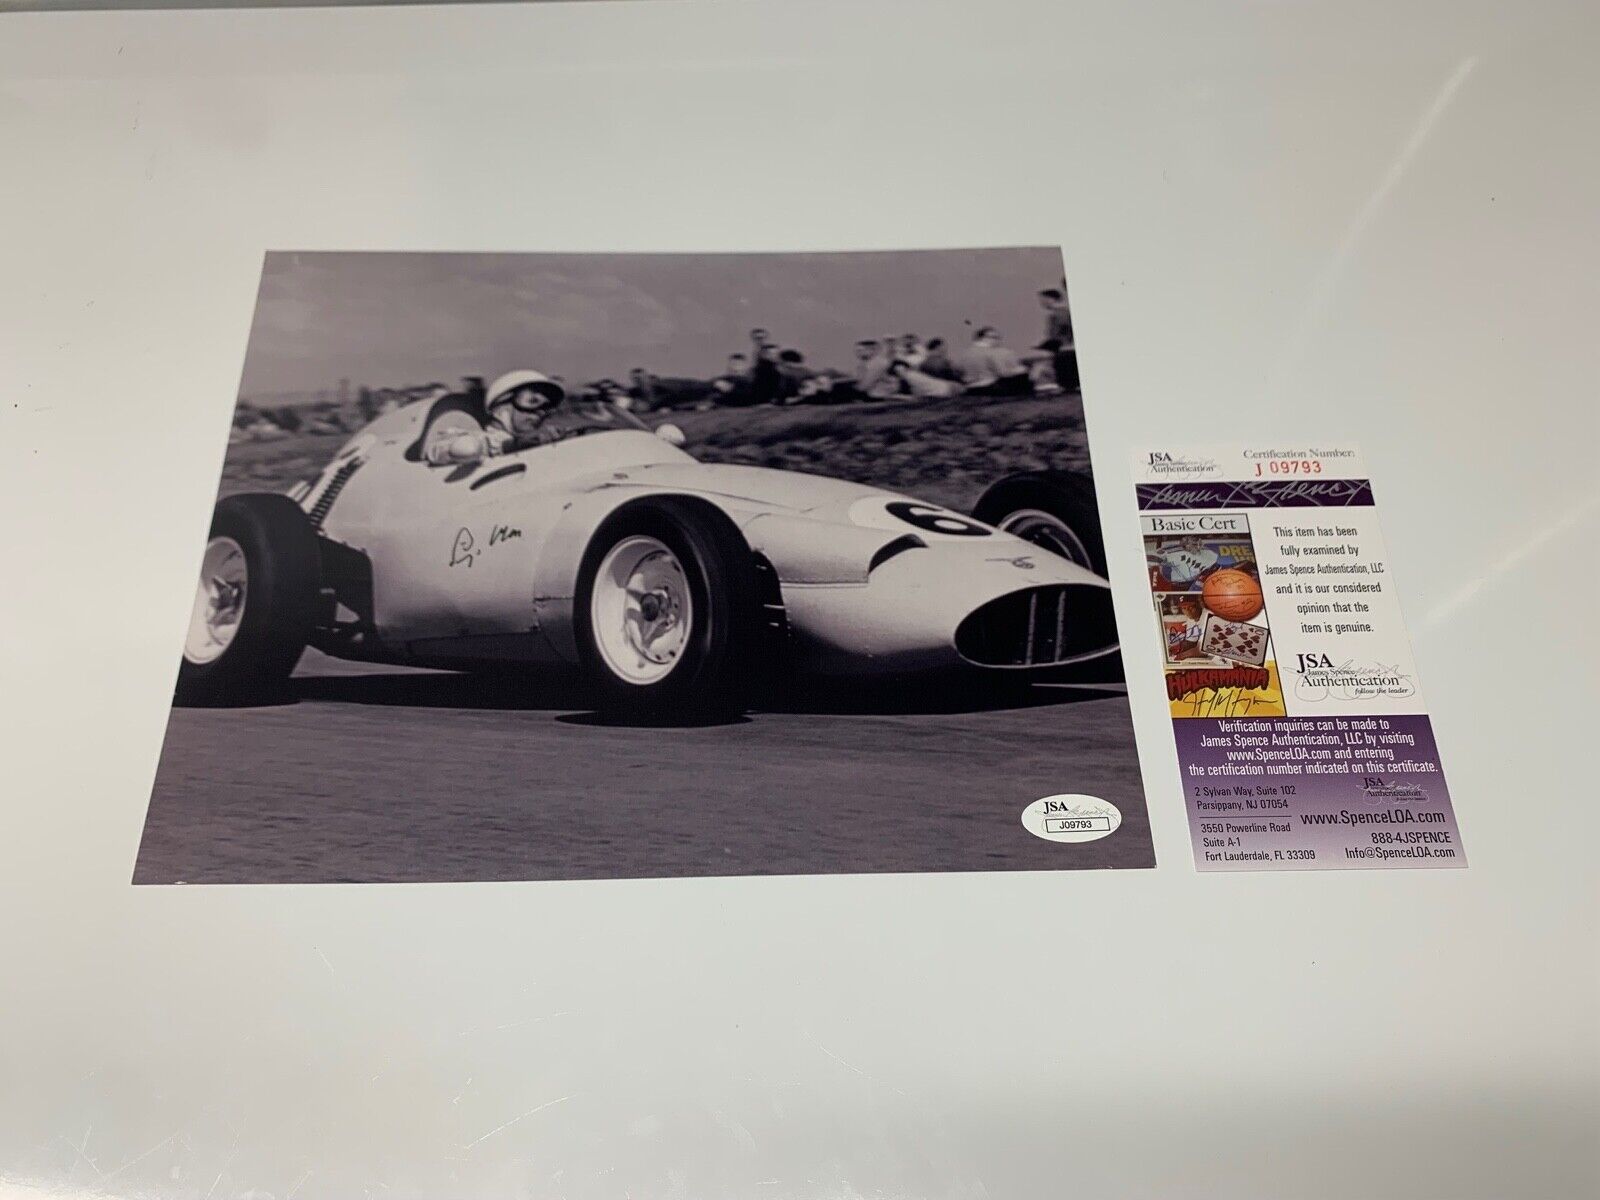 Stirling Moss Racing Driver Autographed 8x10 Photo JSA Certified J09793